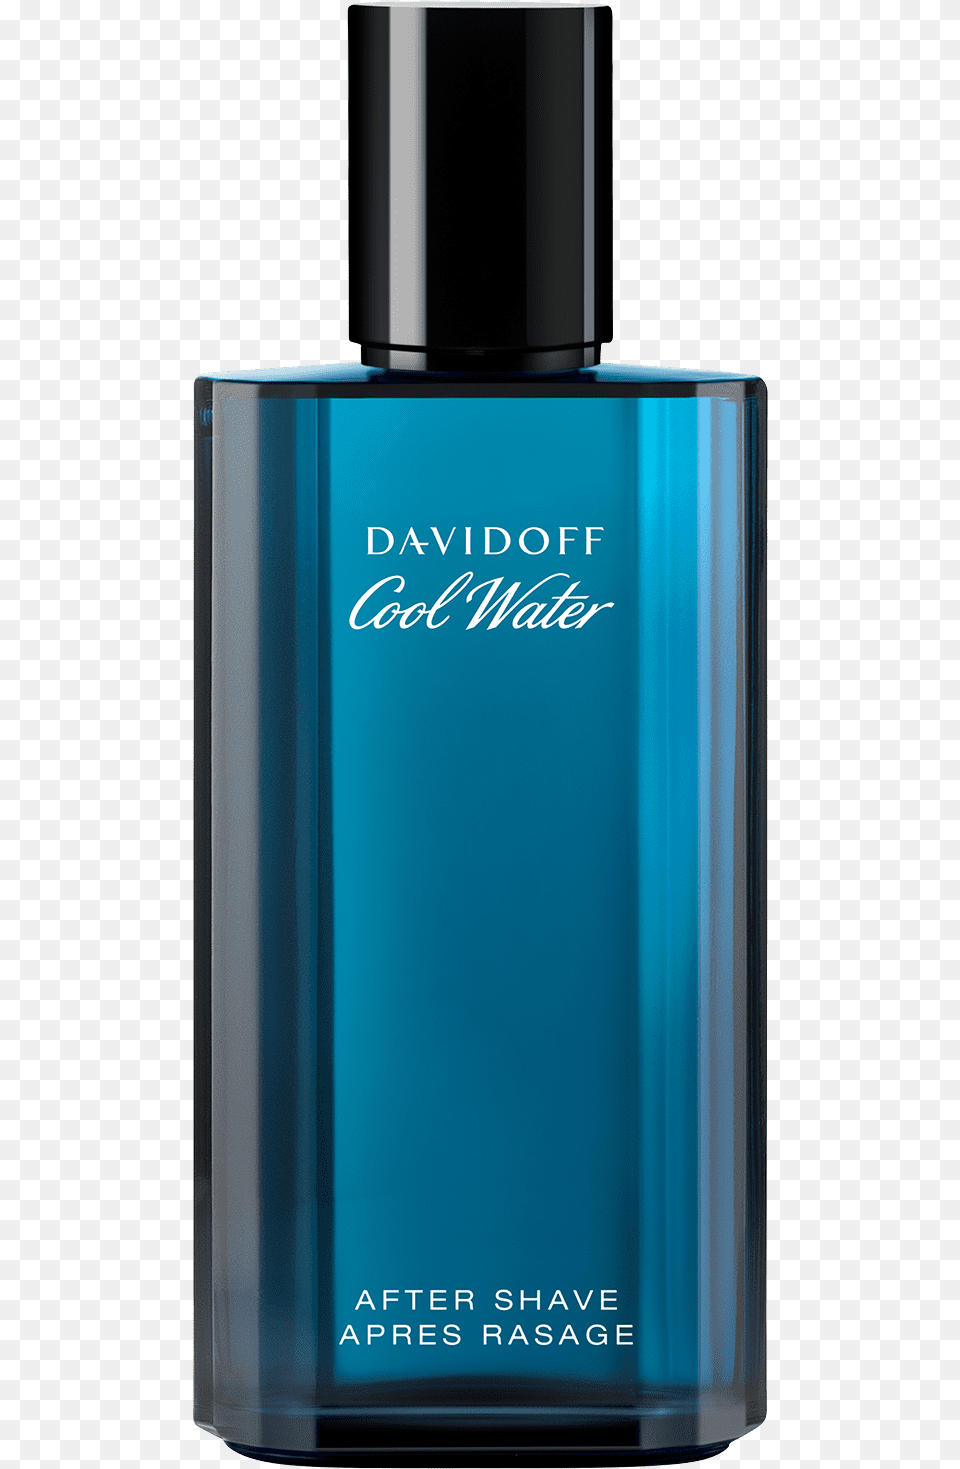 Cool Water Man After Shave Splash Davidoff Cool Ater 135 Oz, Aftershave, Bottle, Cosmetics, Perfume Free Png Download